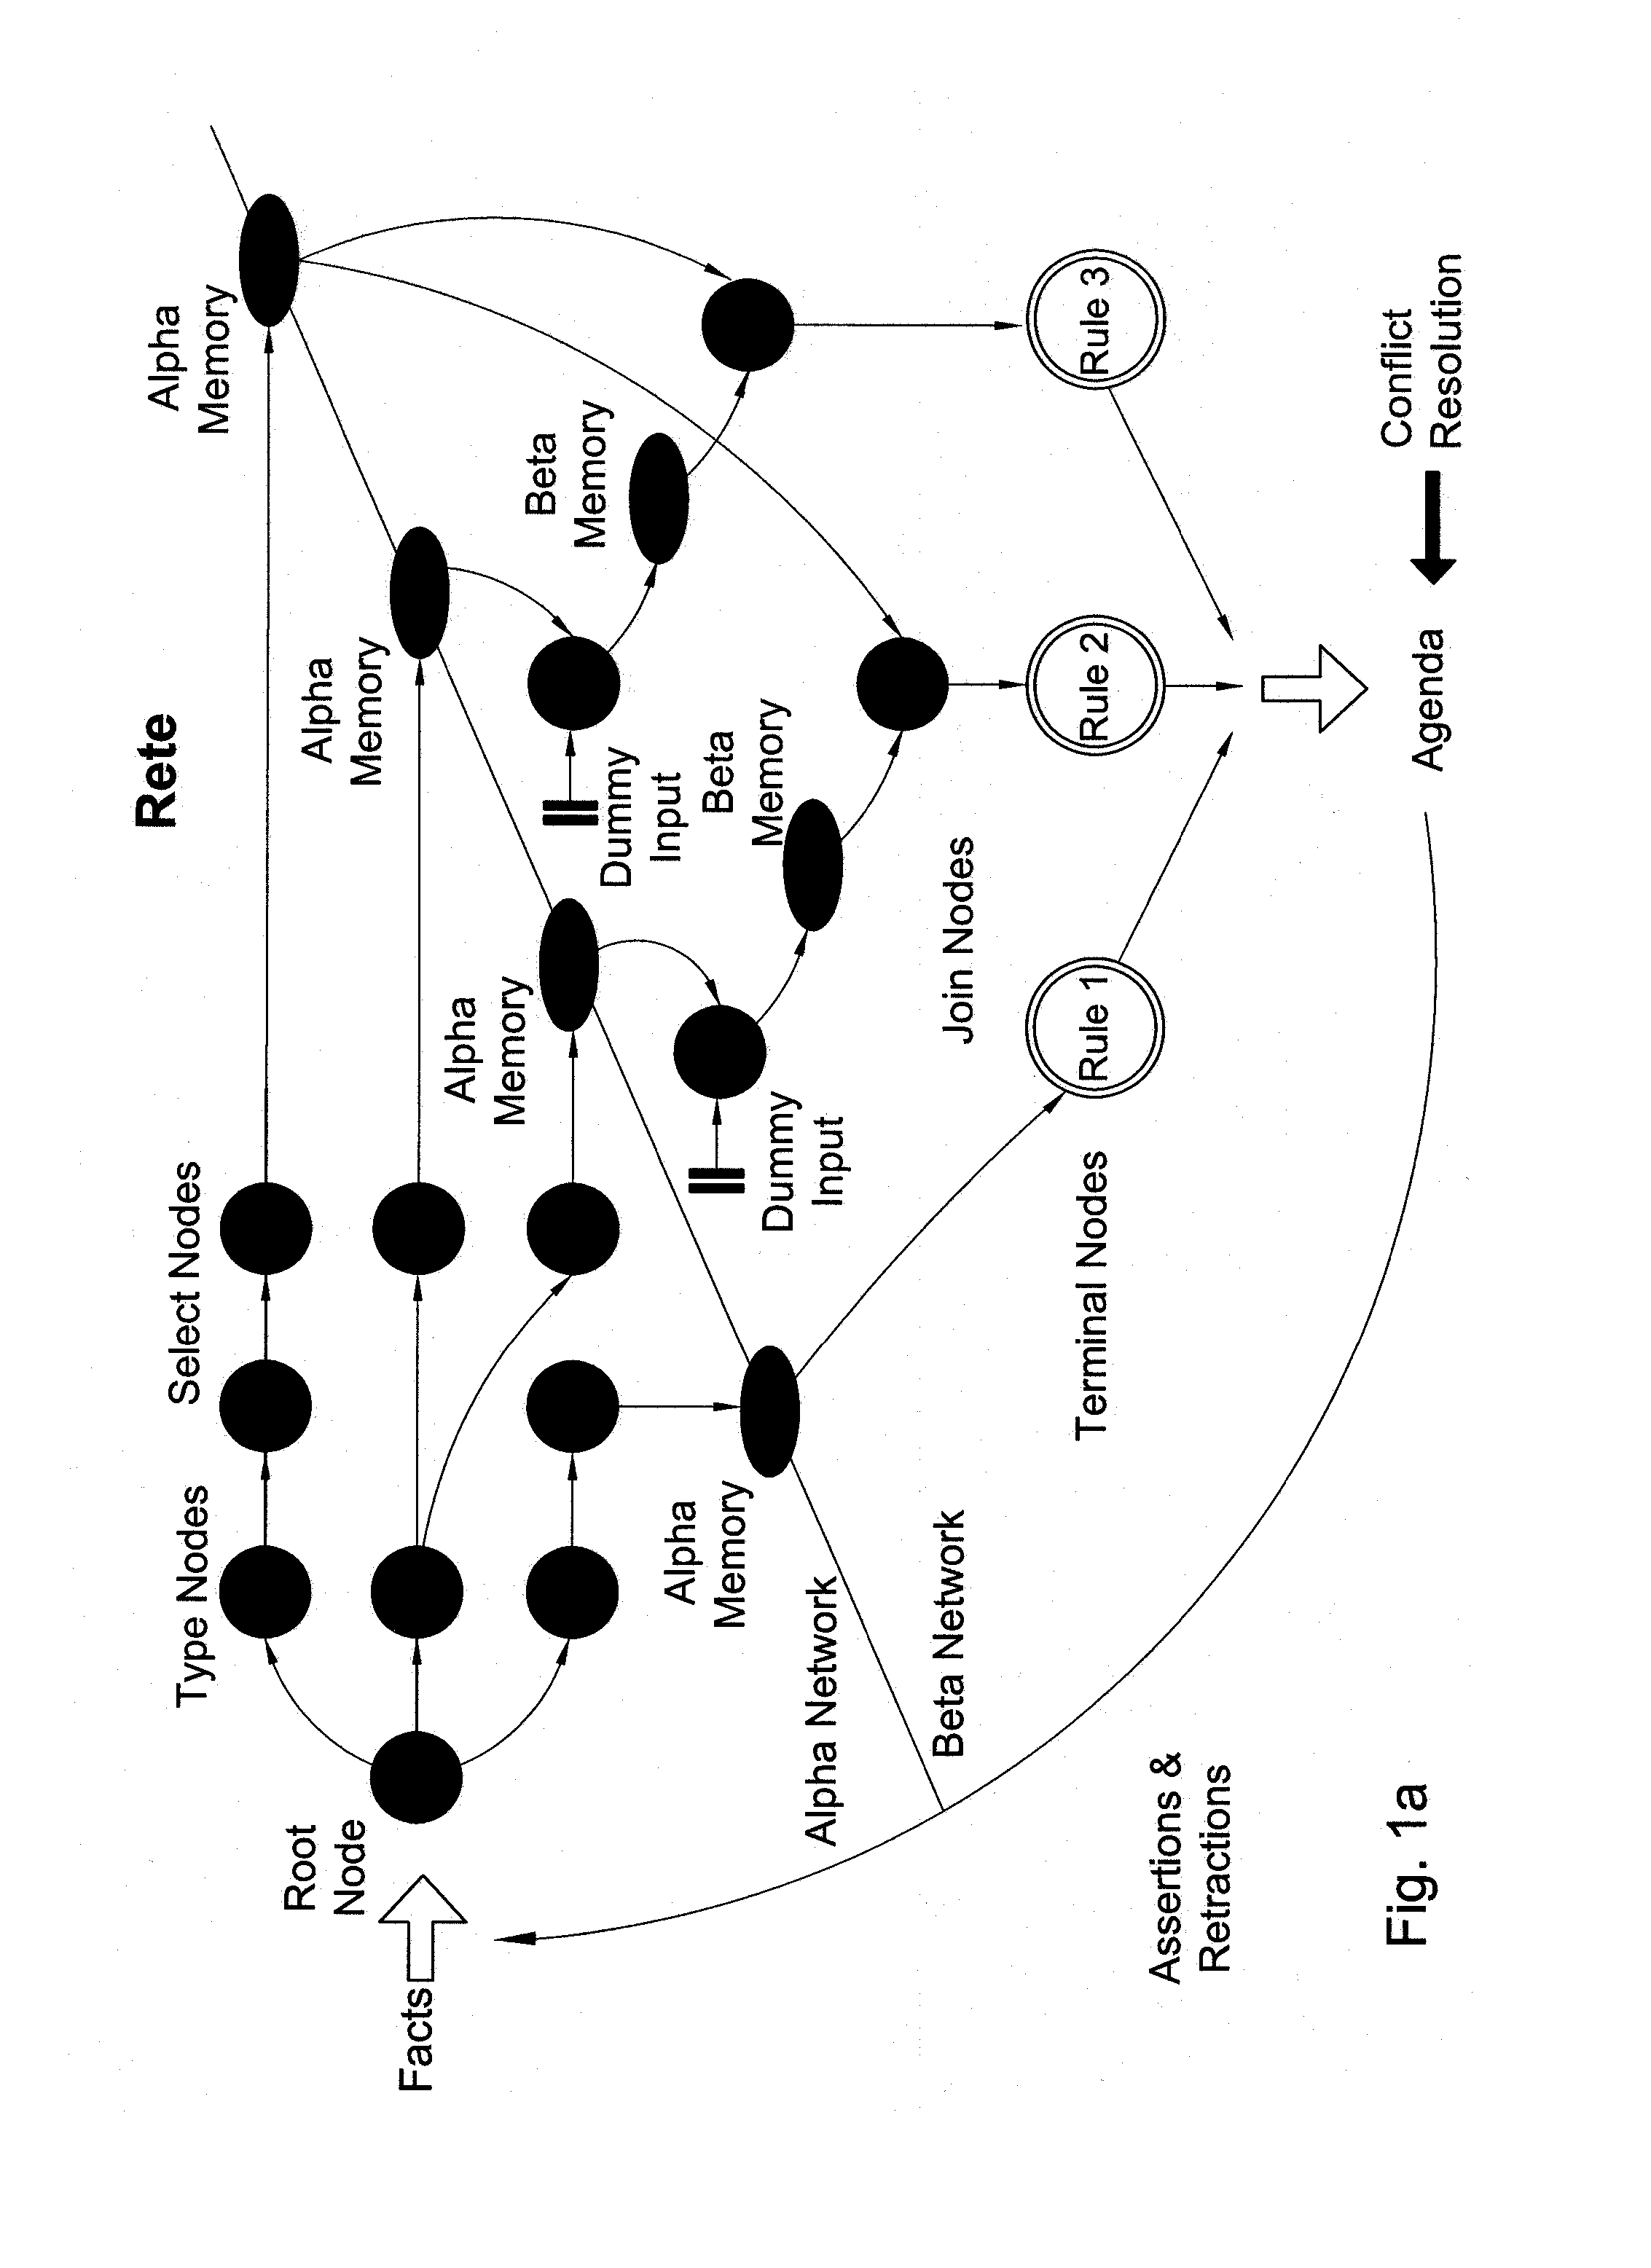 System and Method for Evaluating Intent of a Human Partner to a Dialogue Between Human User and Computerized System